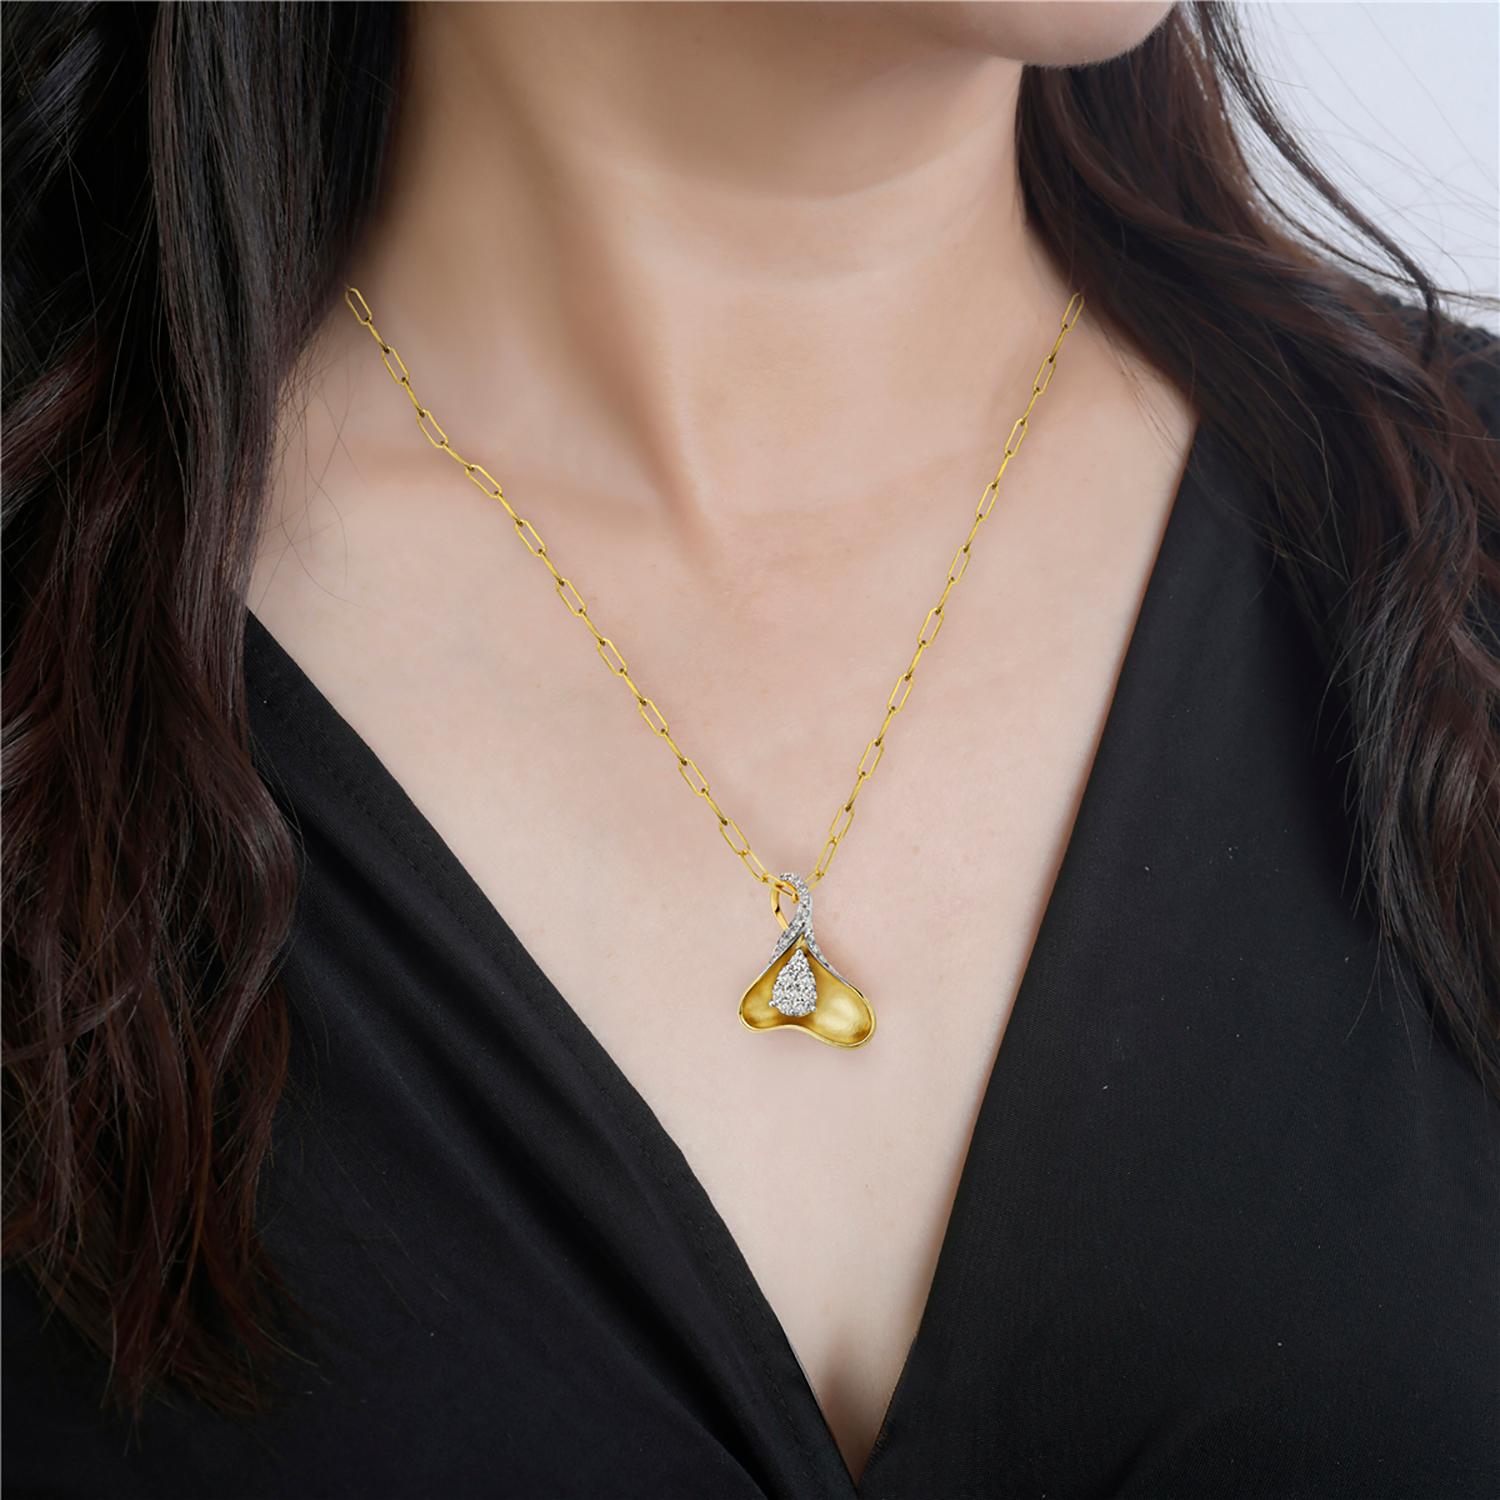 This elegant pendant features a unique curved petal shape made from 14k yellow gold, and is surrounded by a stunning halo of diamonds that adds an extra touch of sparkle and luxury. The pendant is perfect for adding a touch of sophistication to any